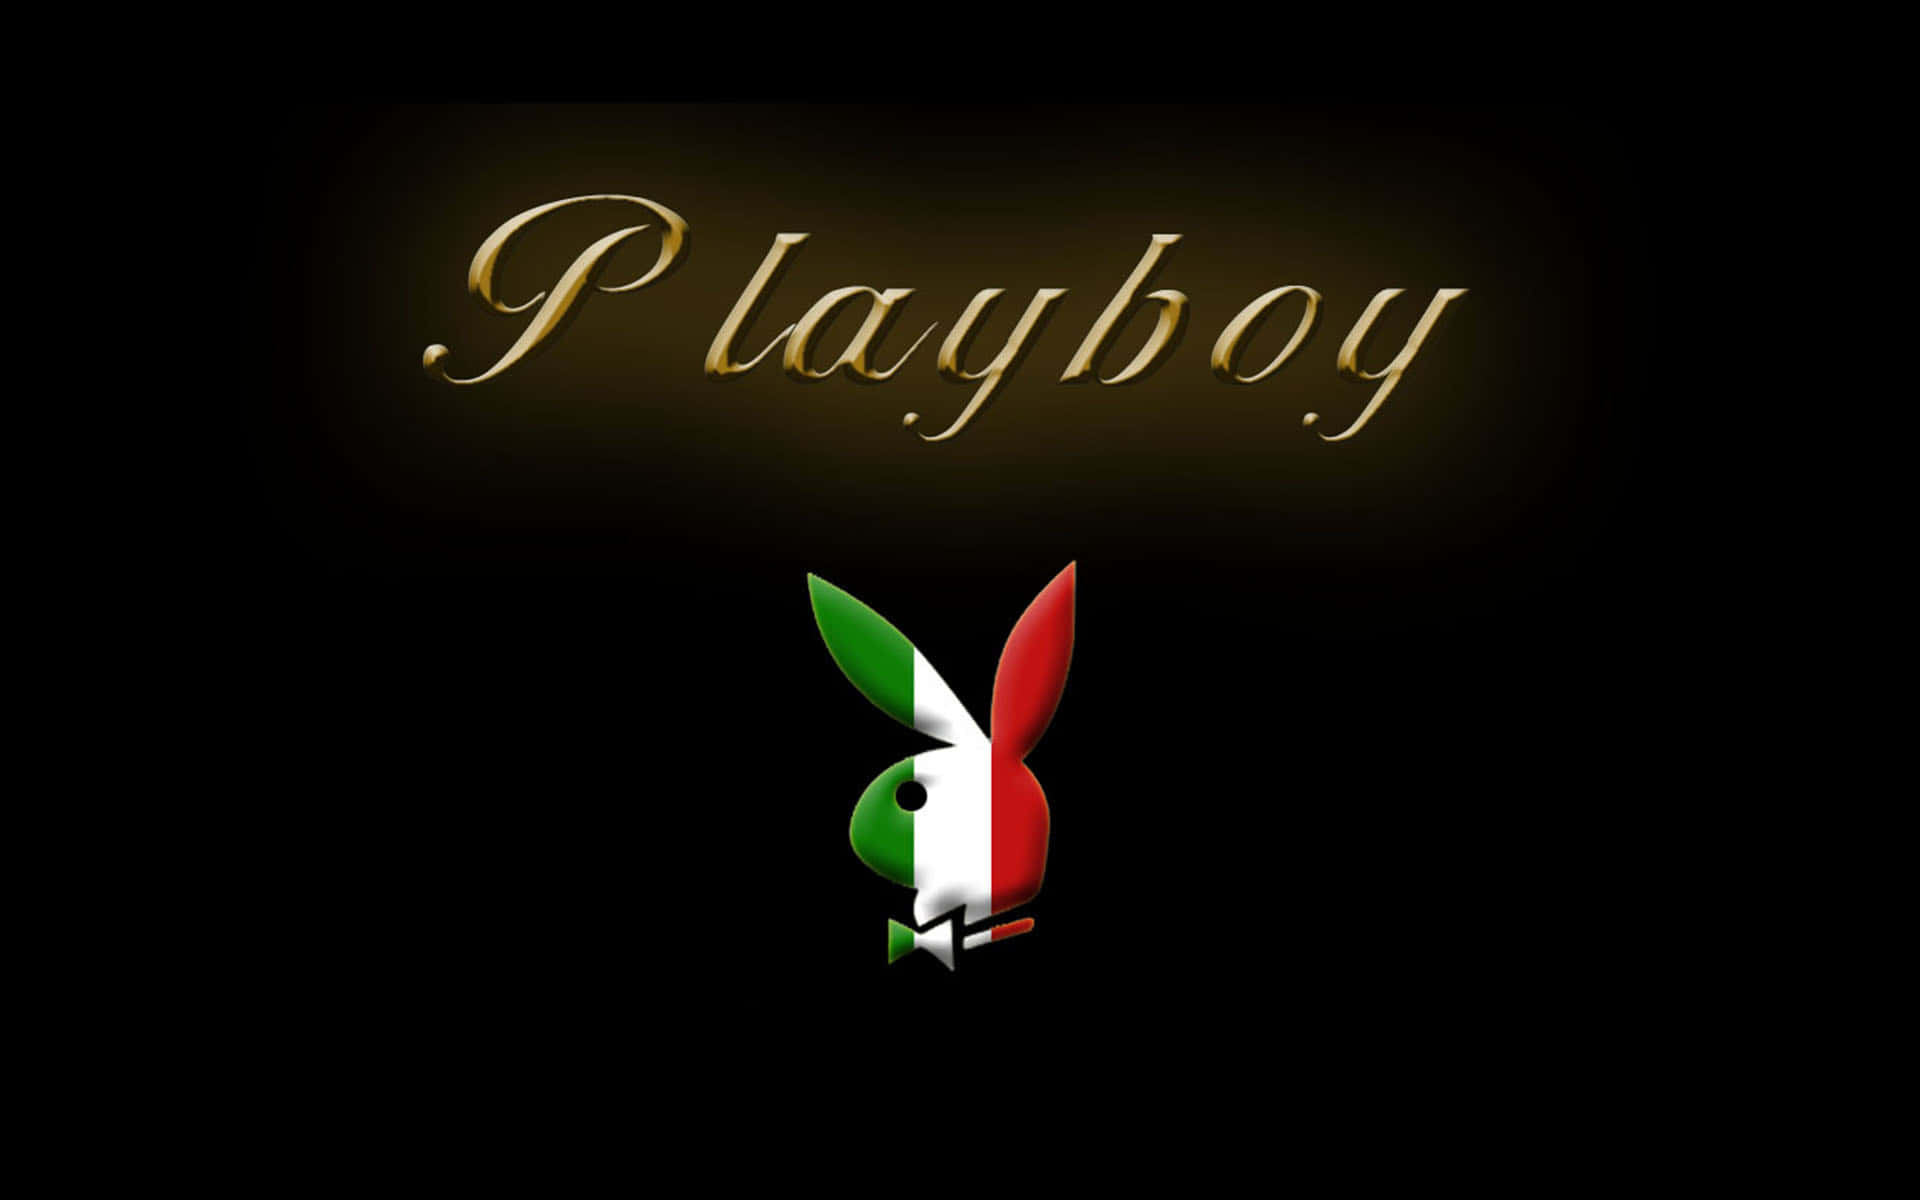 Get Cosy with Playboy 🐇